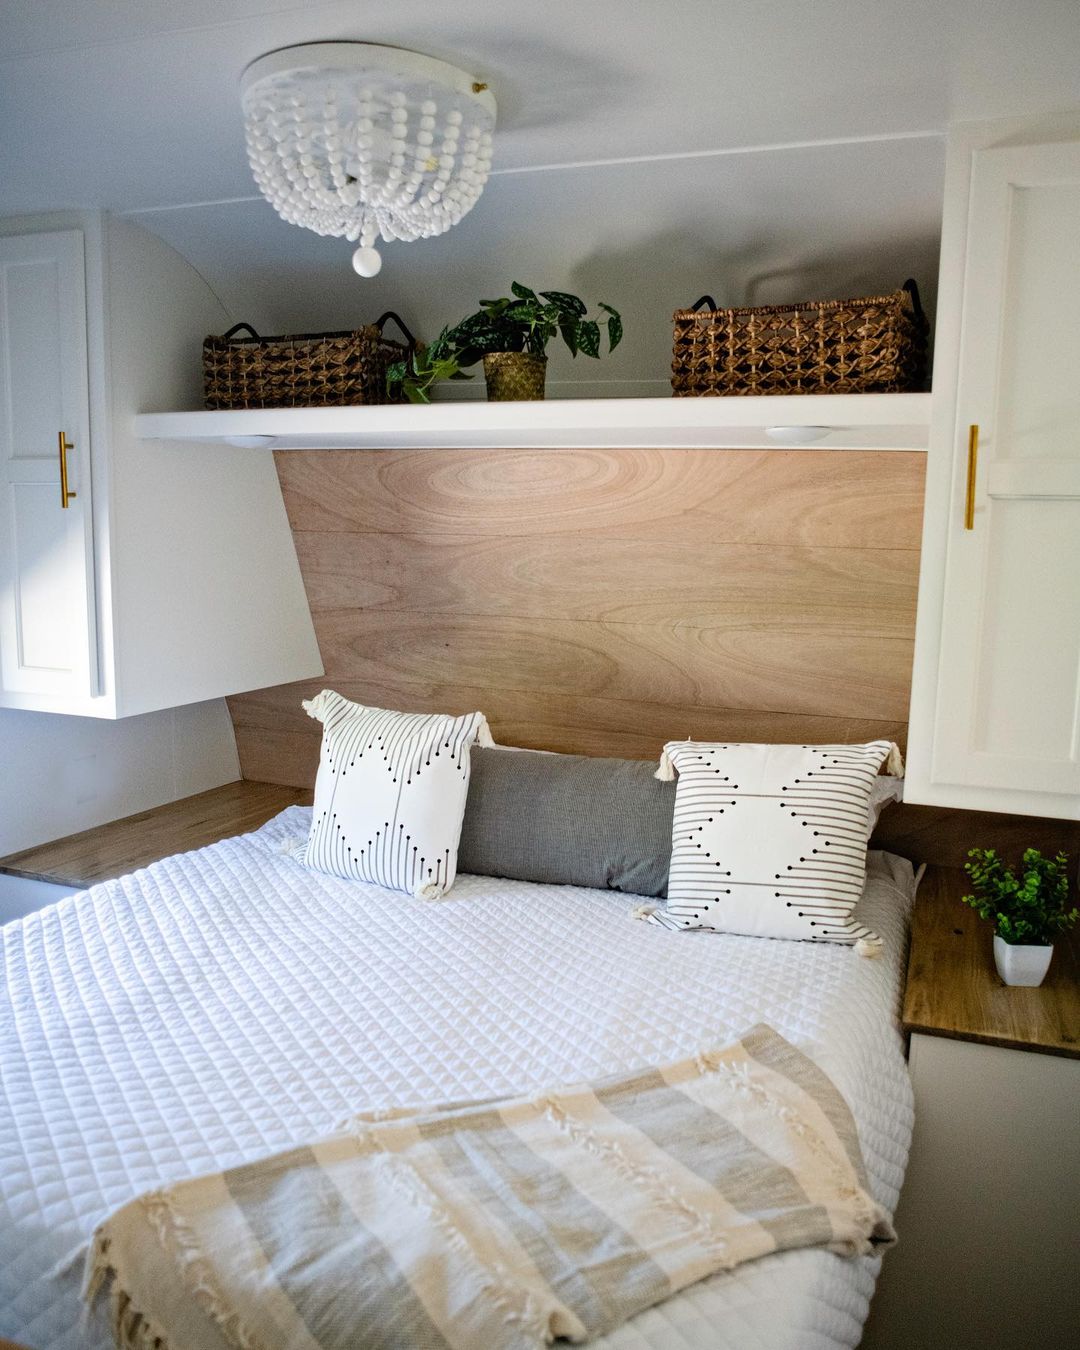 19 Headboard Ideas for Your RV Bedroom Remodel